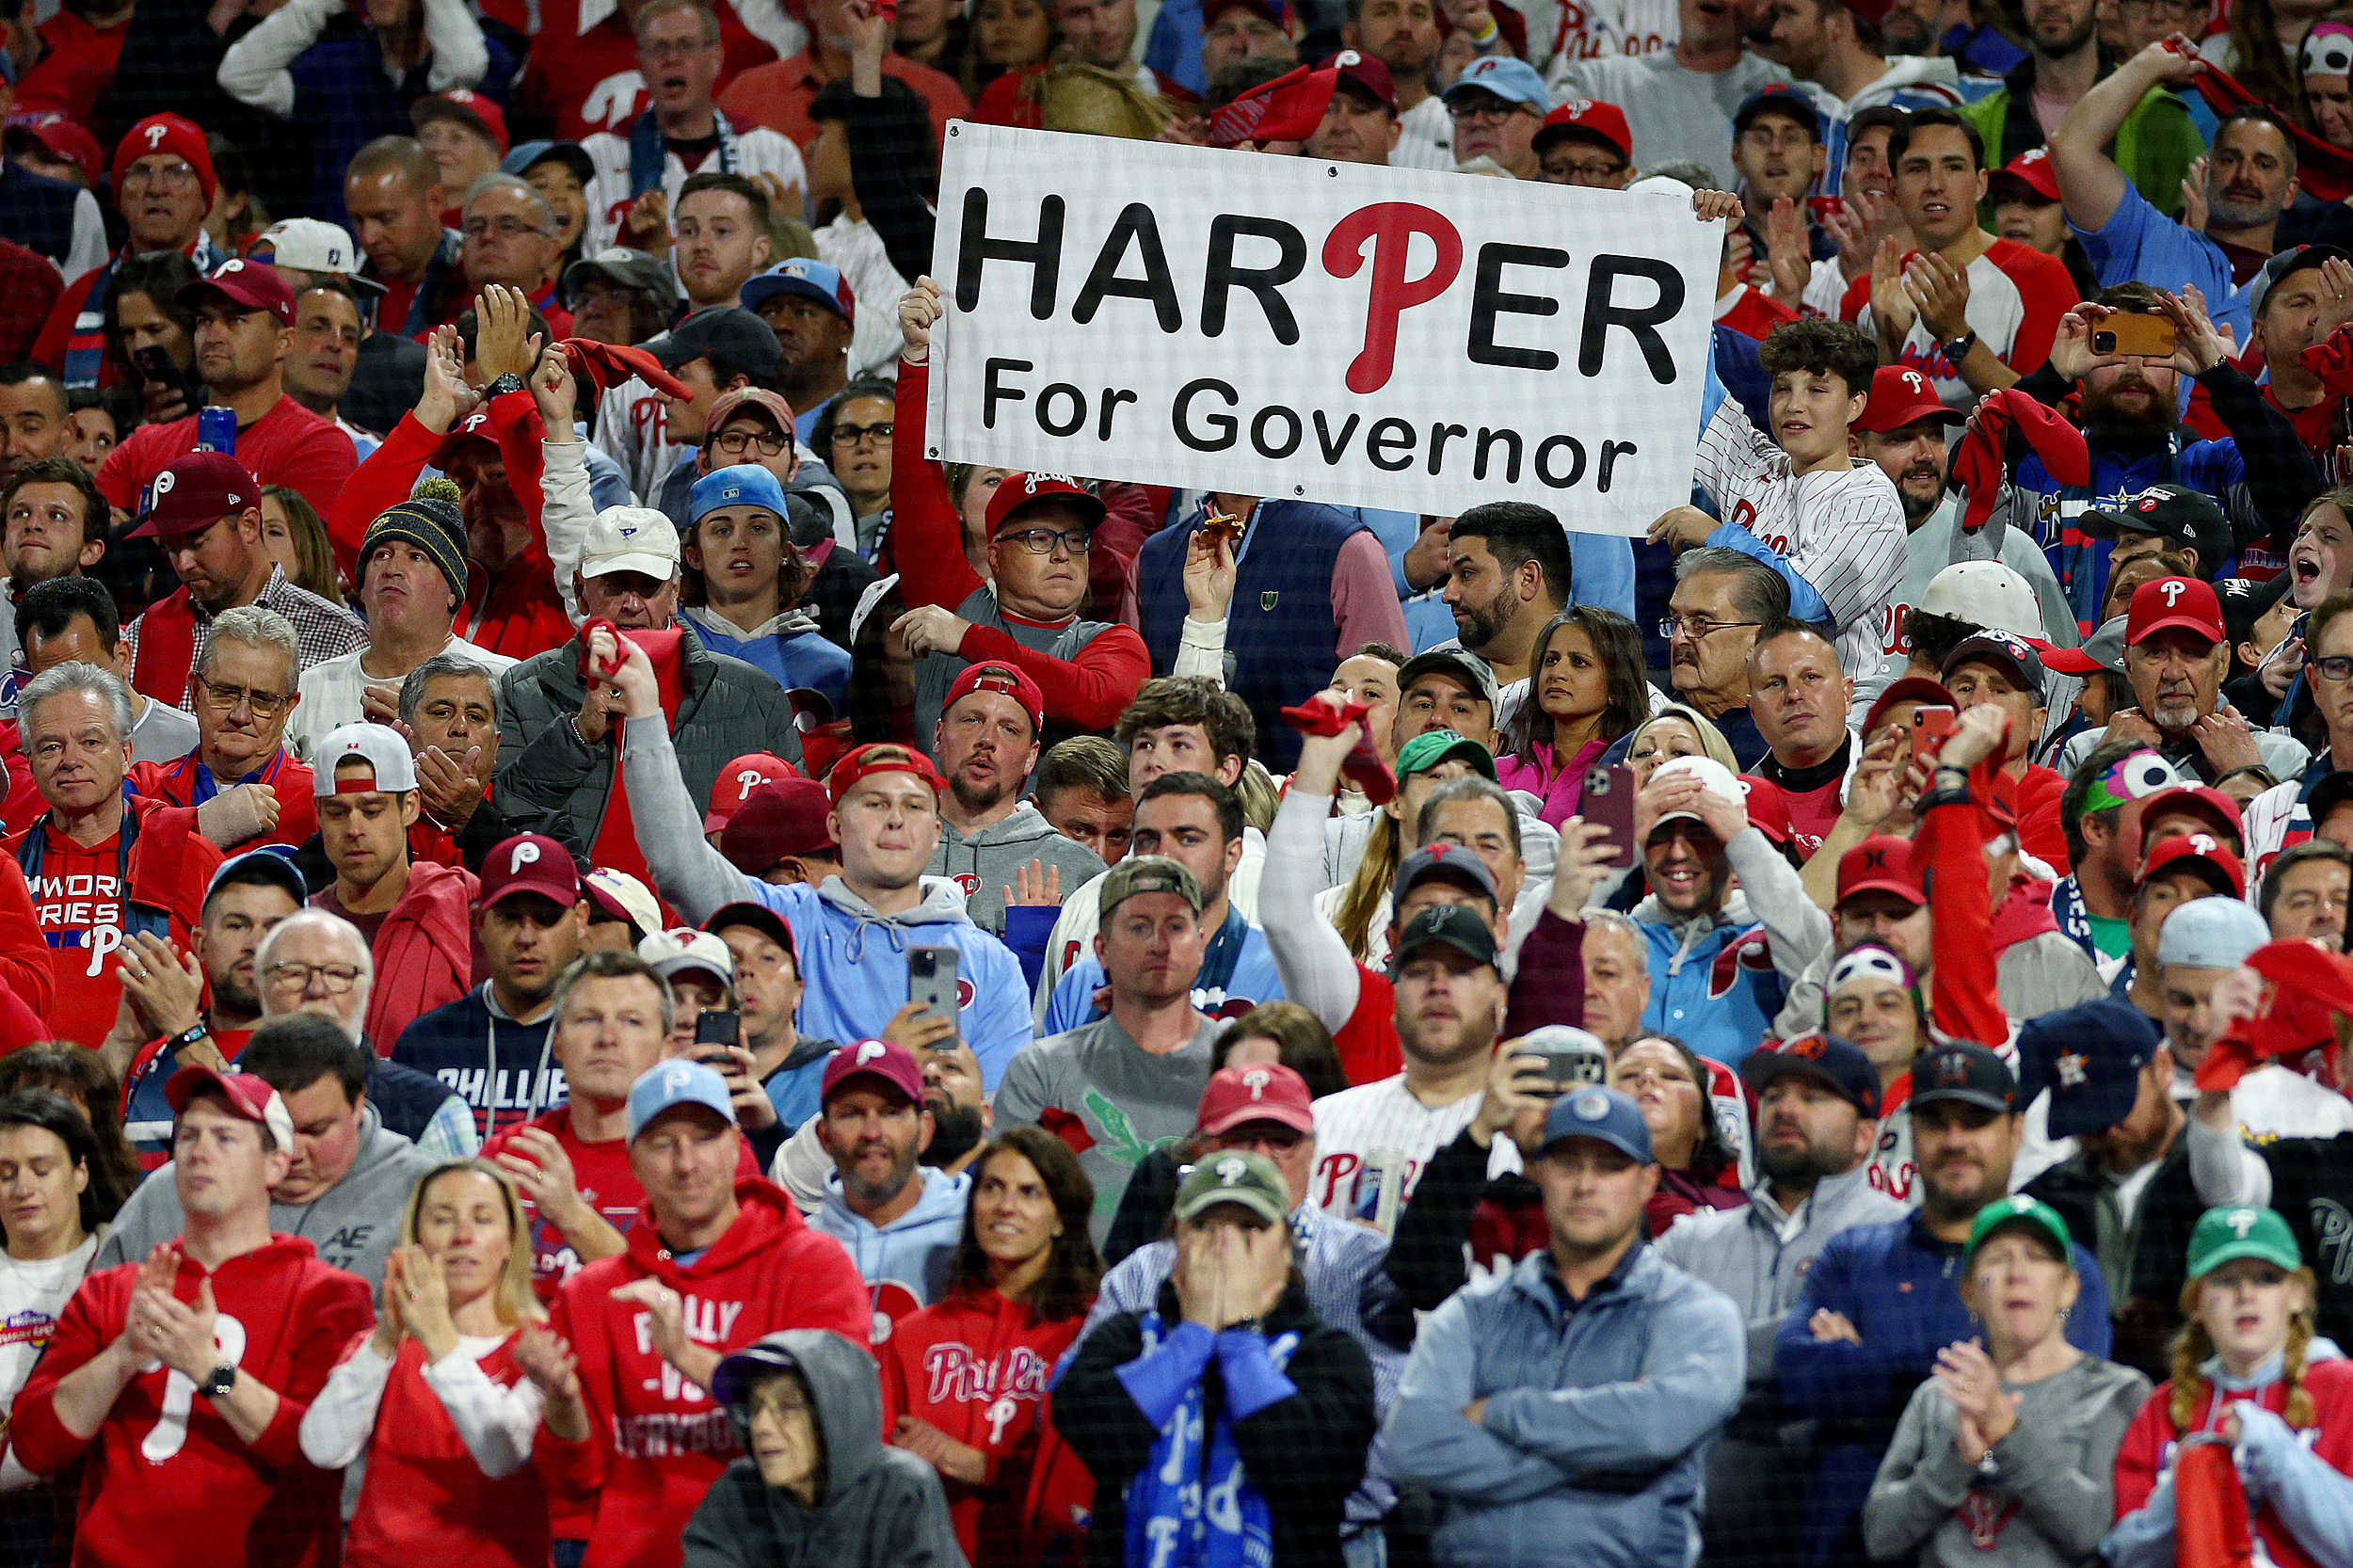 Philadelphia Phillies fans should be absolutely EMBARRASSED by